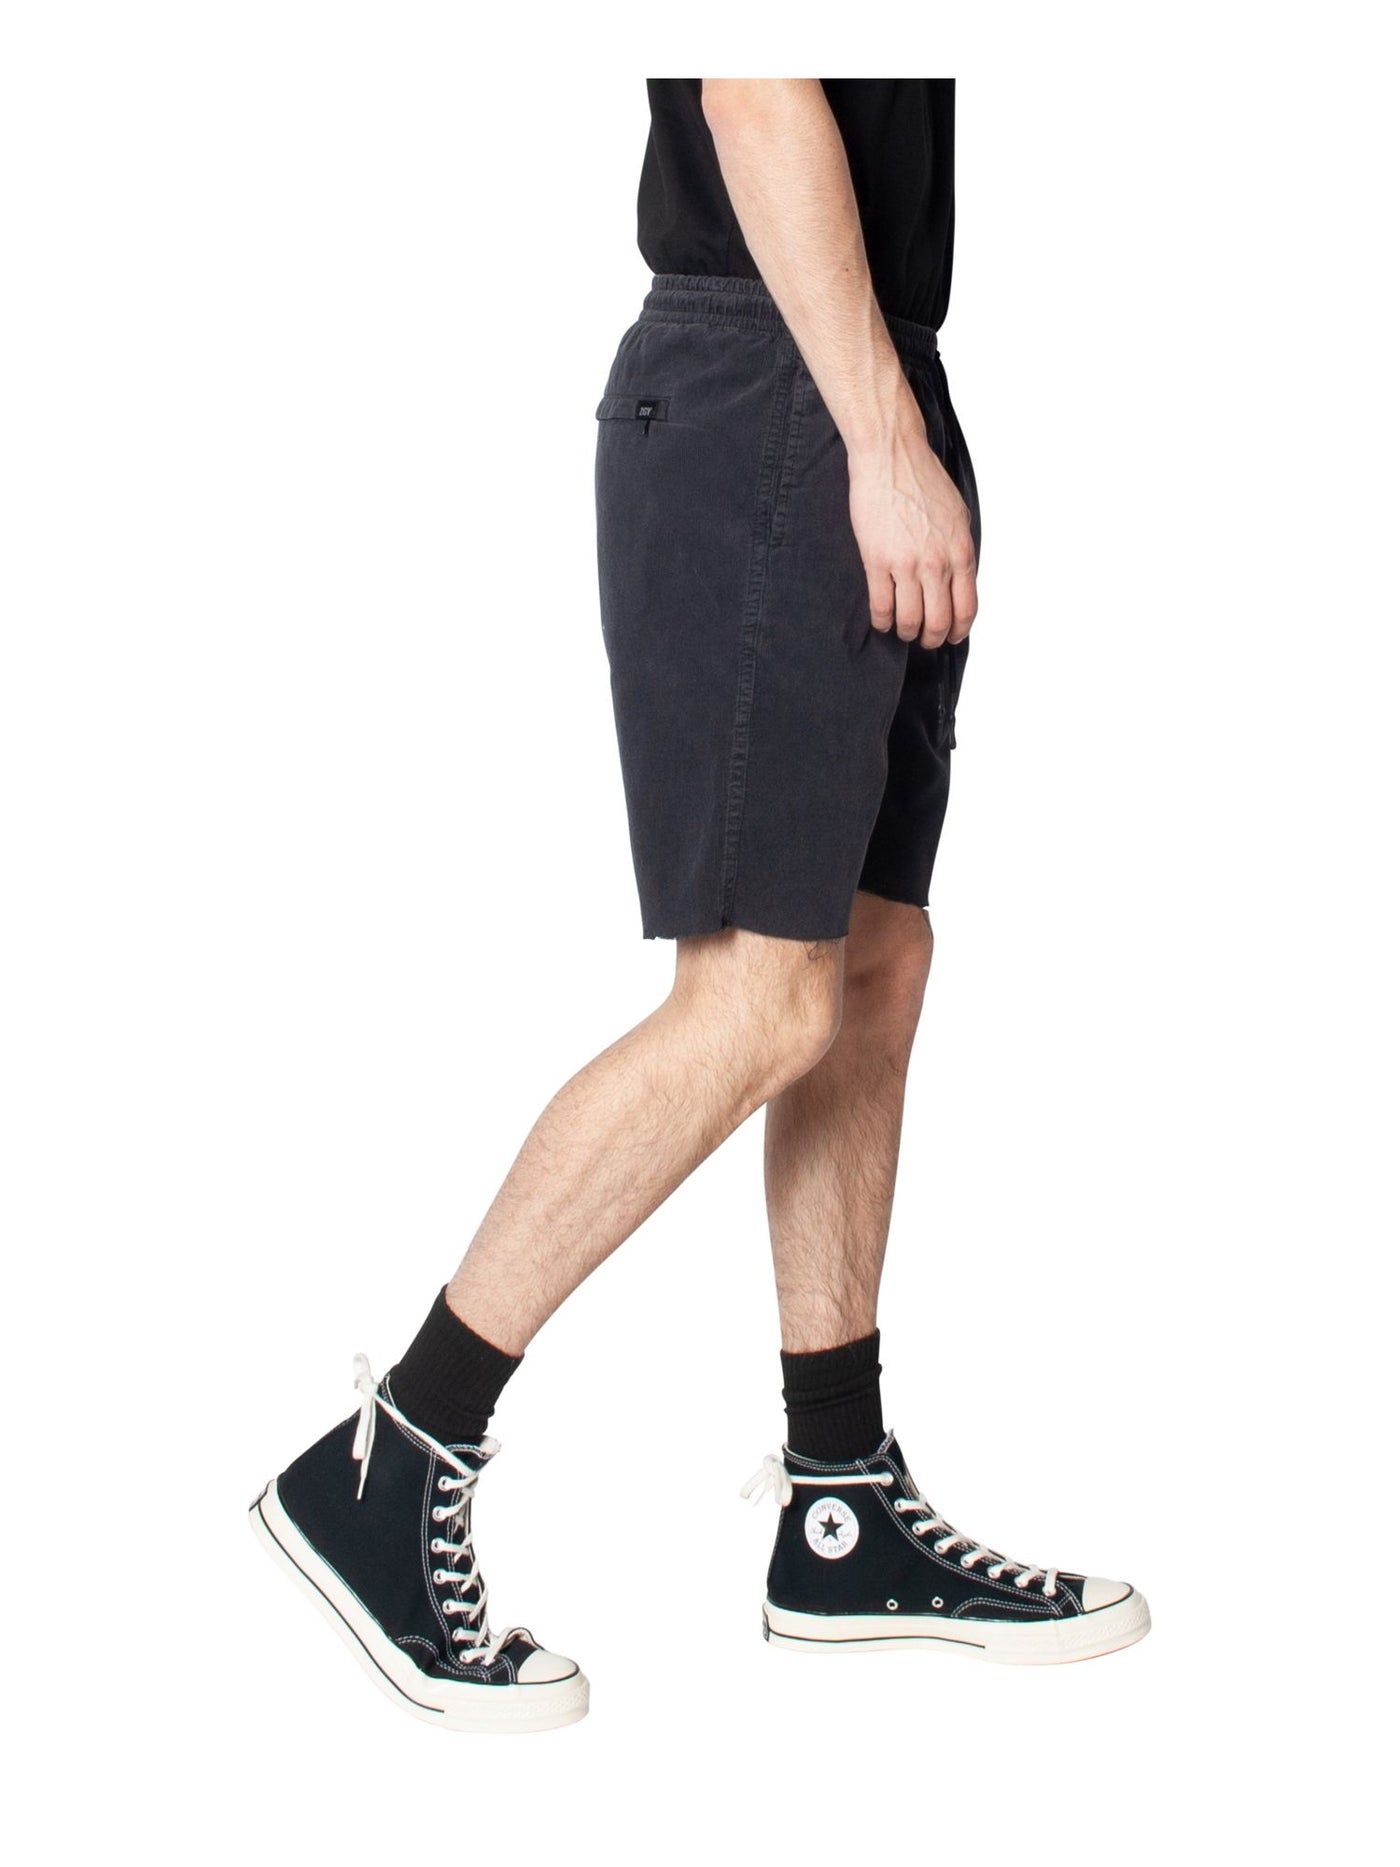 ZGY DENIM Mens Jetty Black Drawstring Flat Front Relaxed Fit Cotton Shorts S